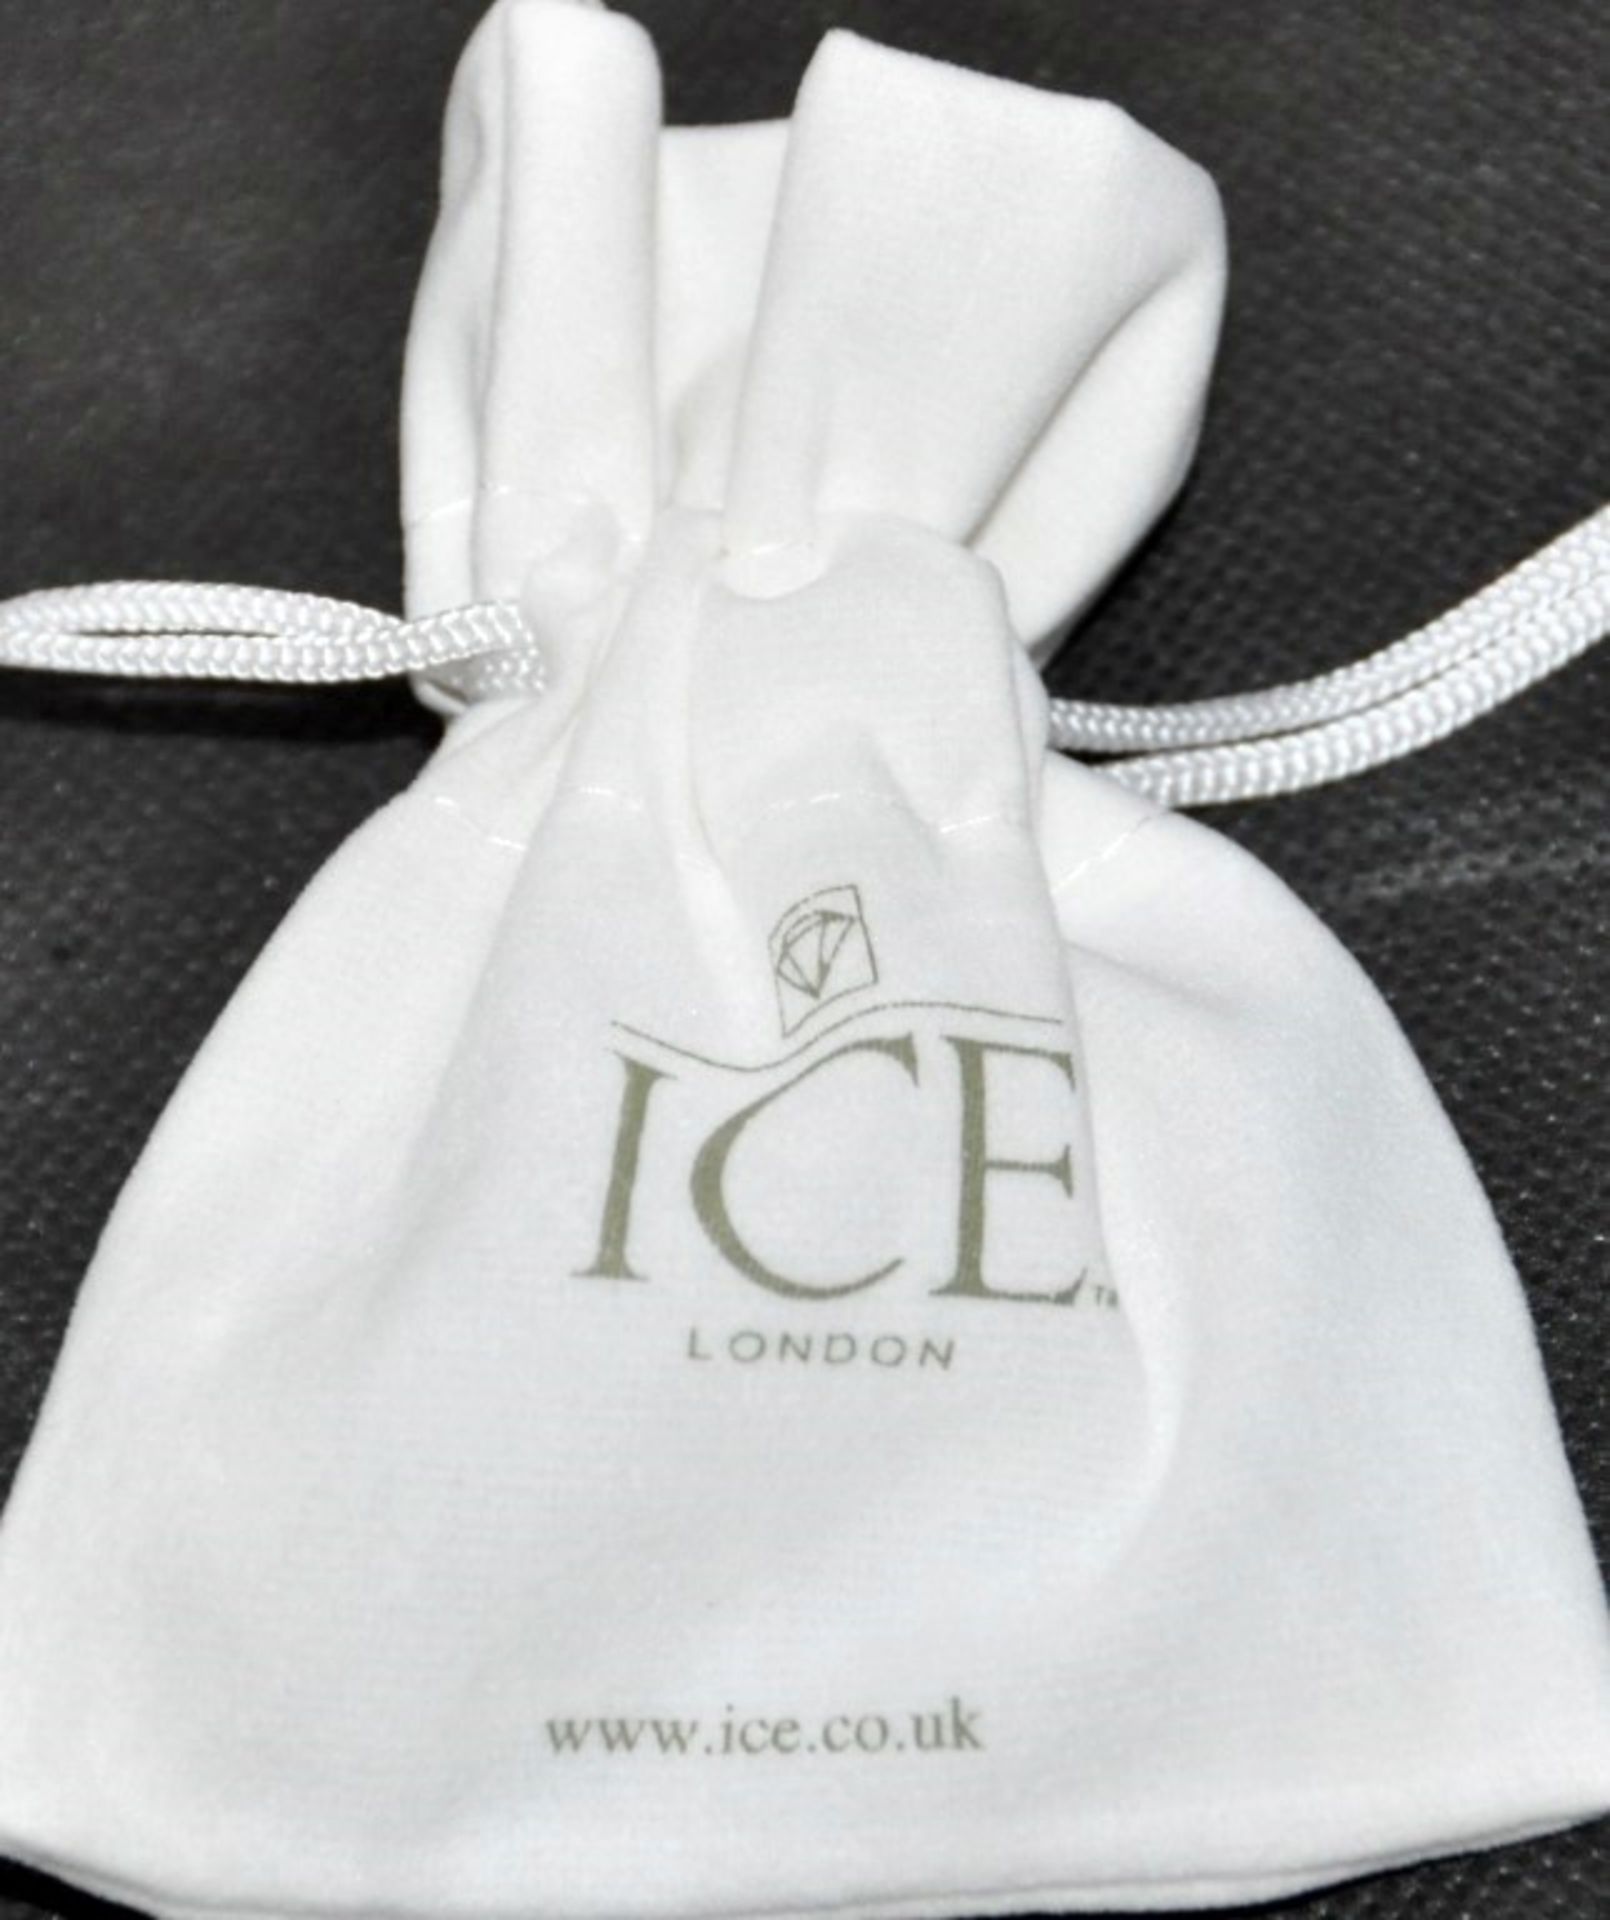 50 x Pairs of Genuine “Circle, Stripe” Enamel CUFFLINKS by Ice London – Silver Plated, 2 Colours - Image 3 of 3